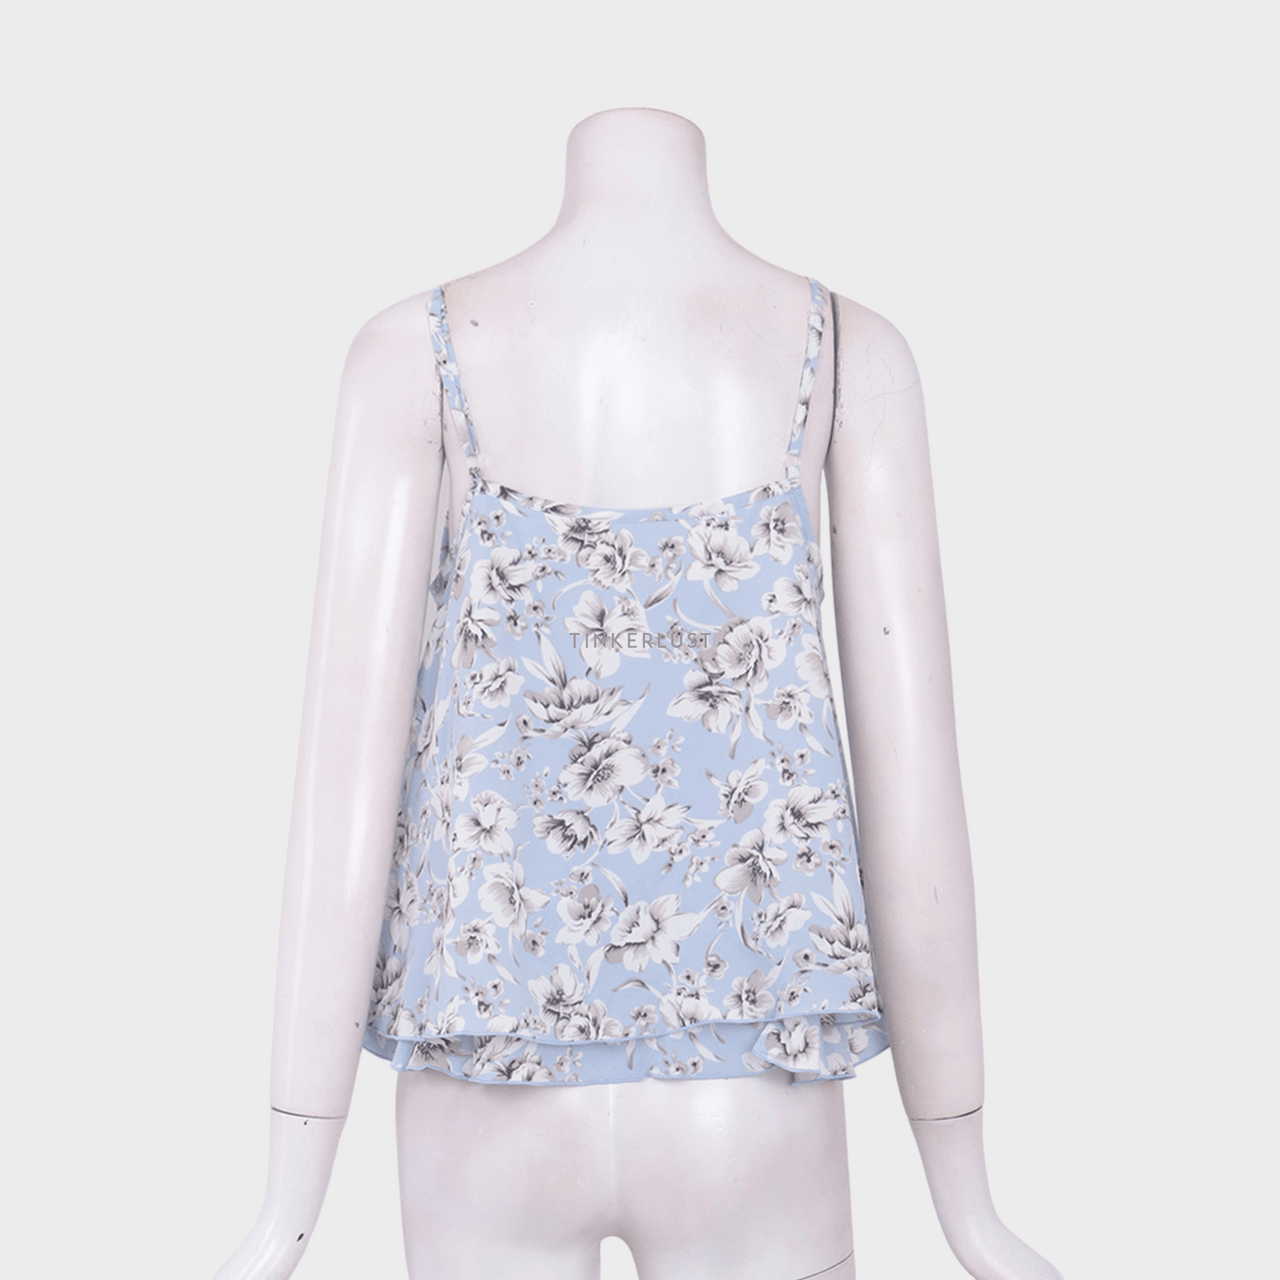 earth music & ecology Blue Floral Sleeveless